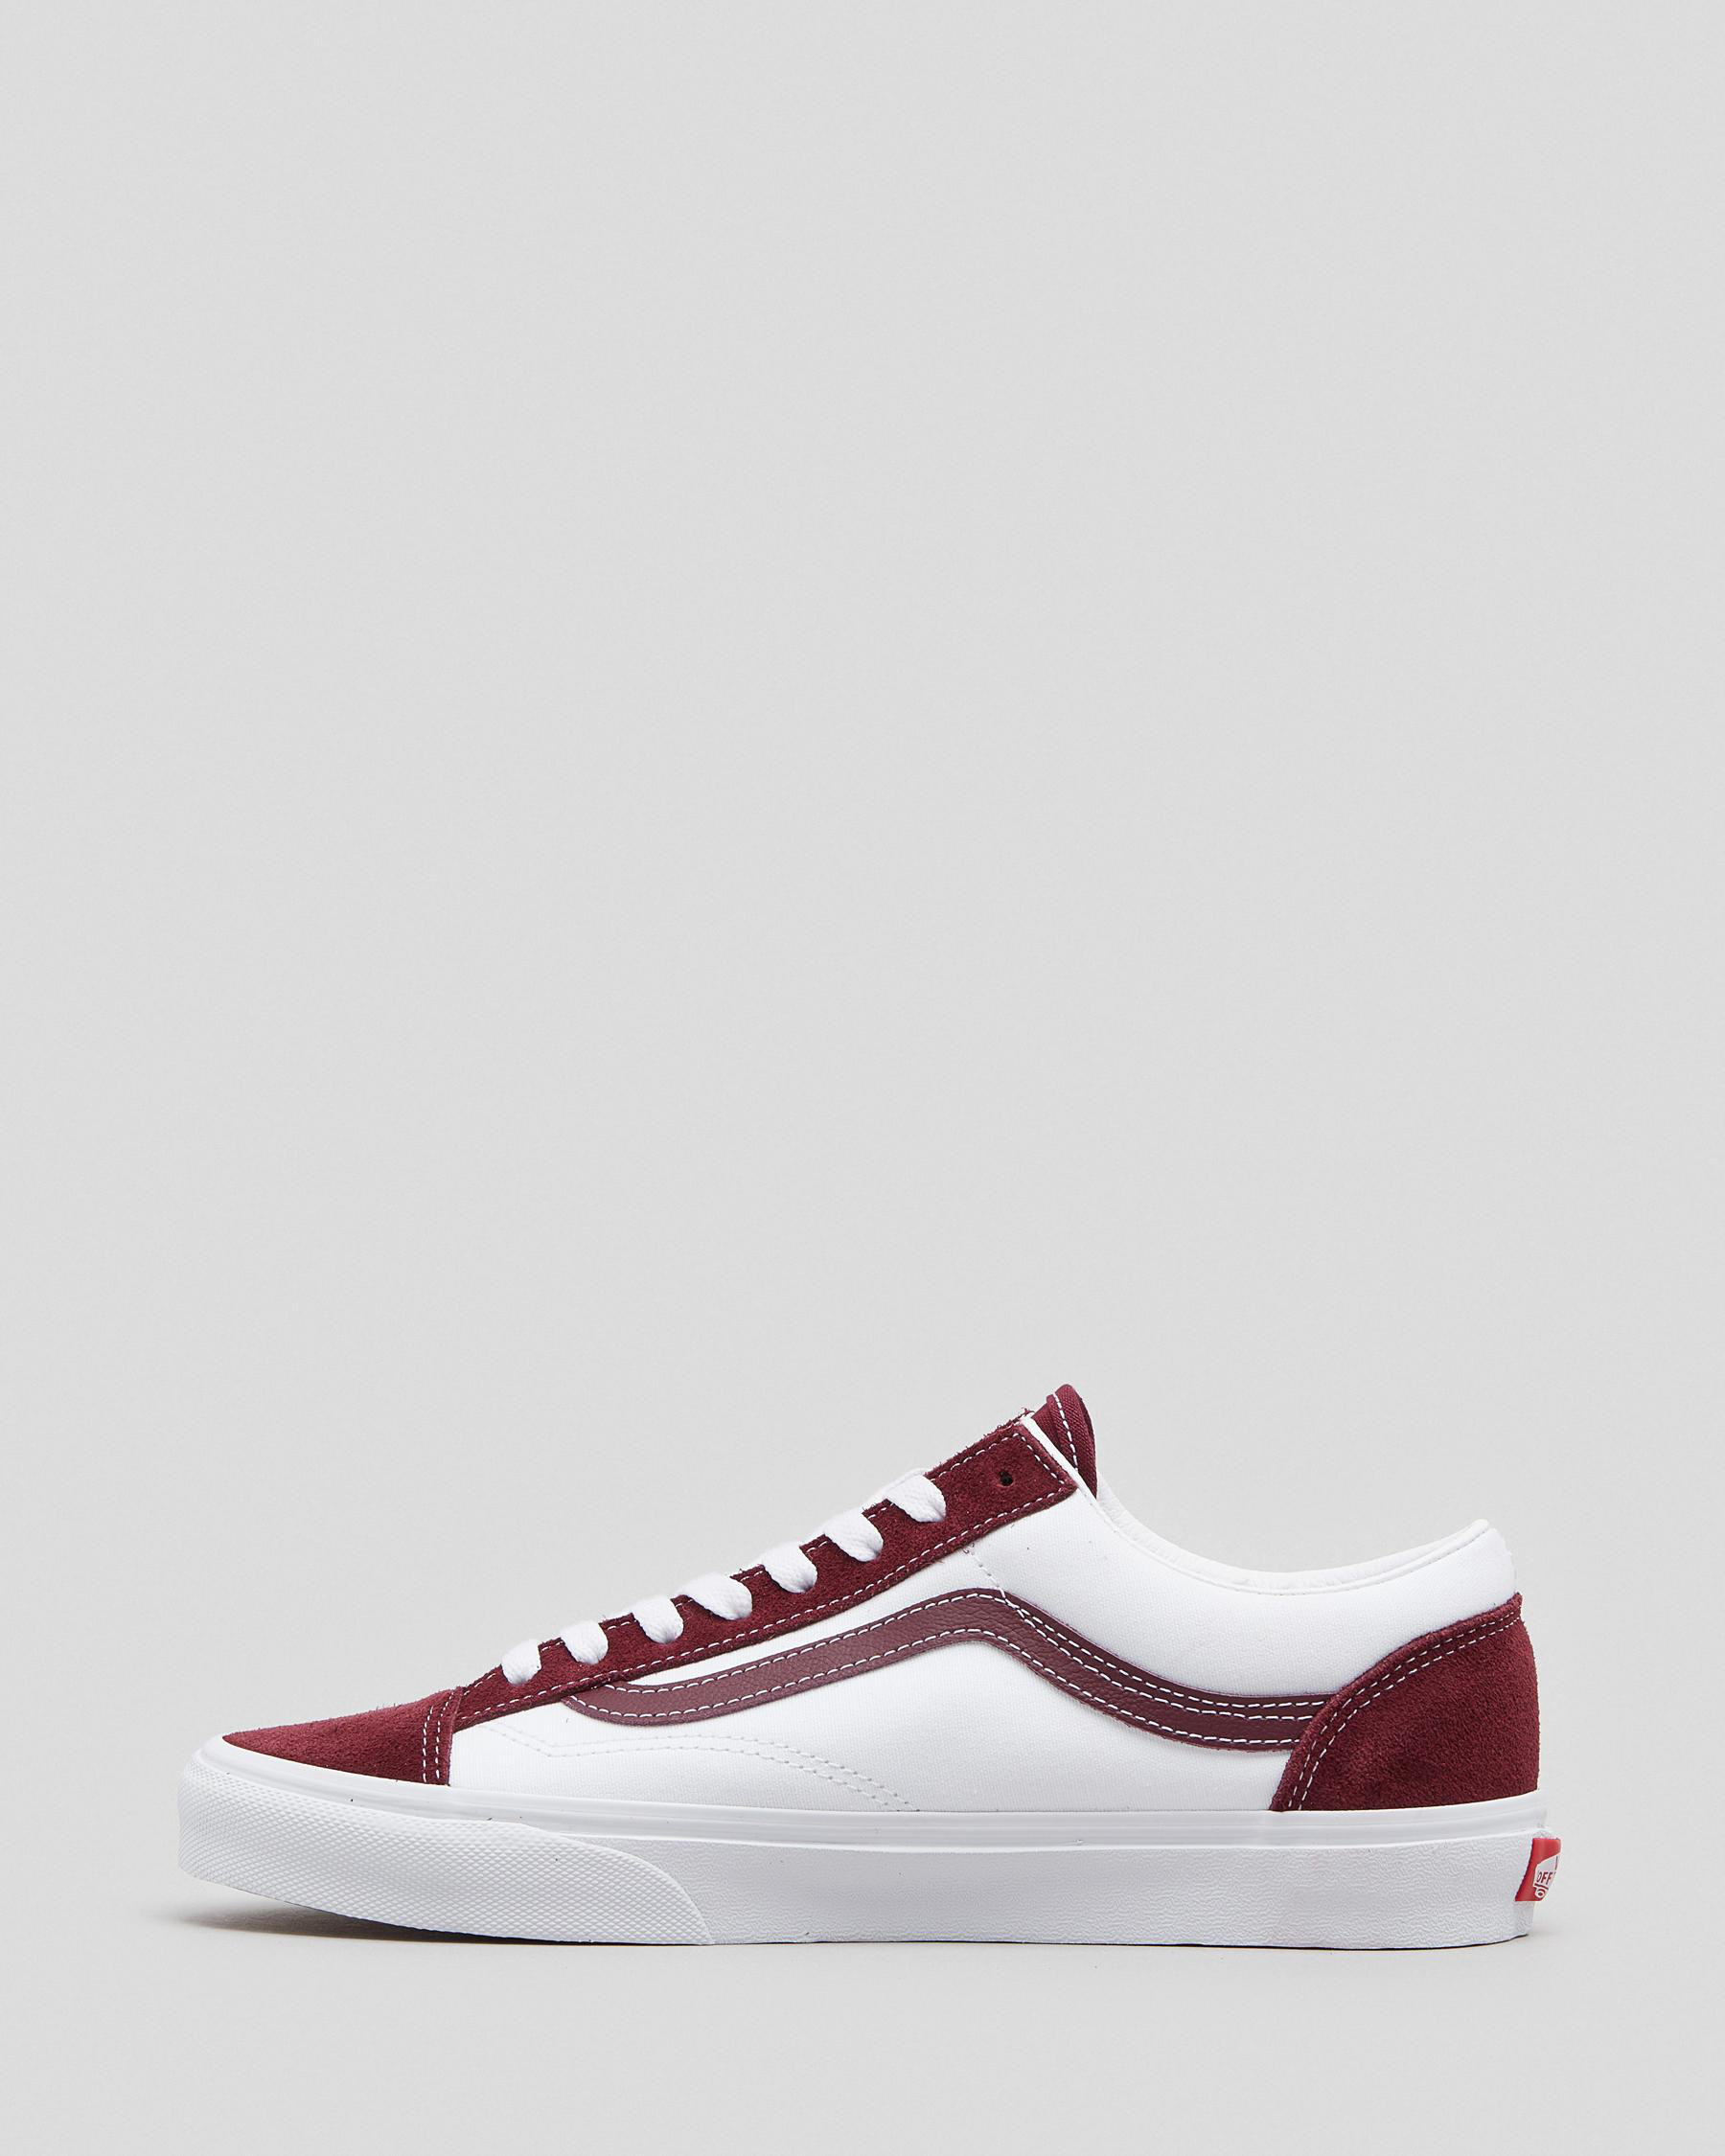 Vans Style 36 Shoes In Port Royale/true White - Fast Shipping & Easy ...